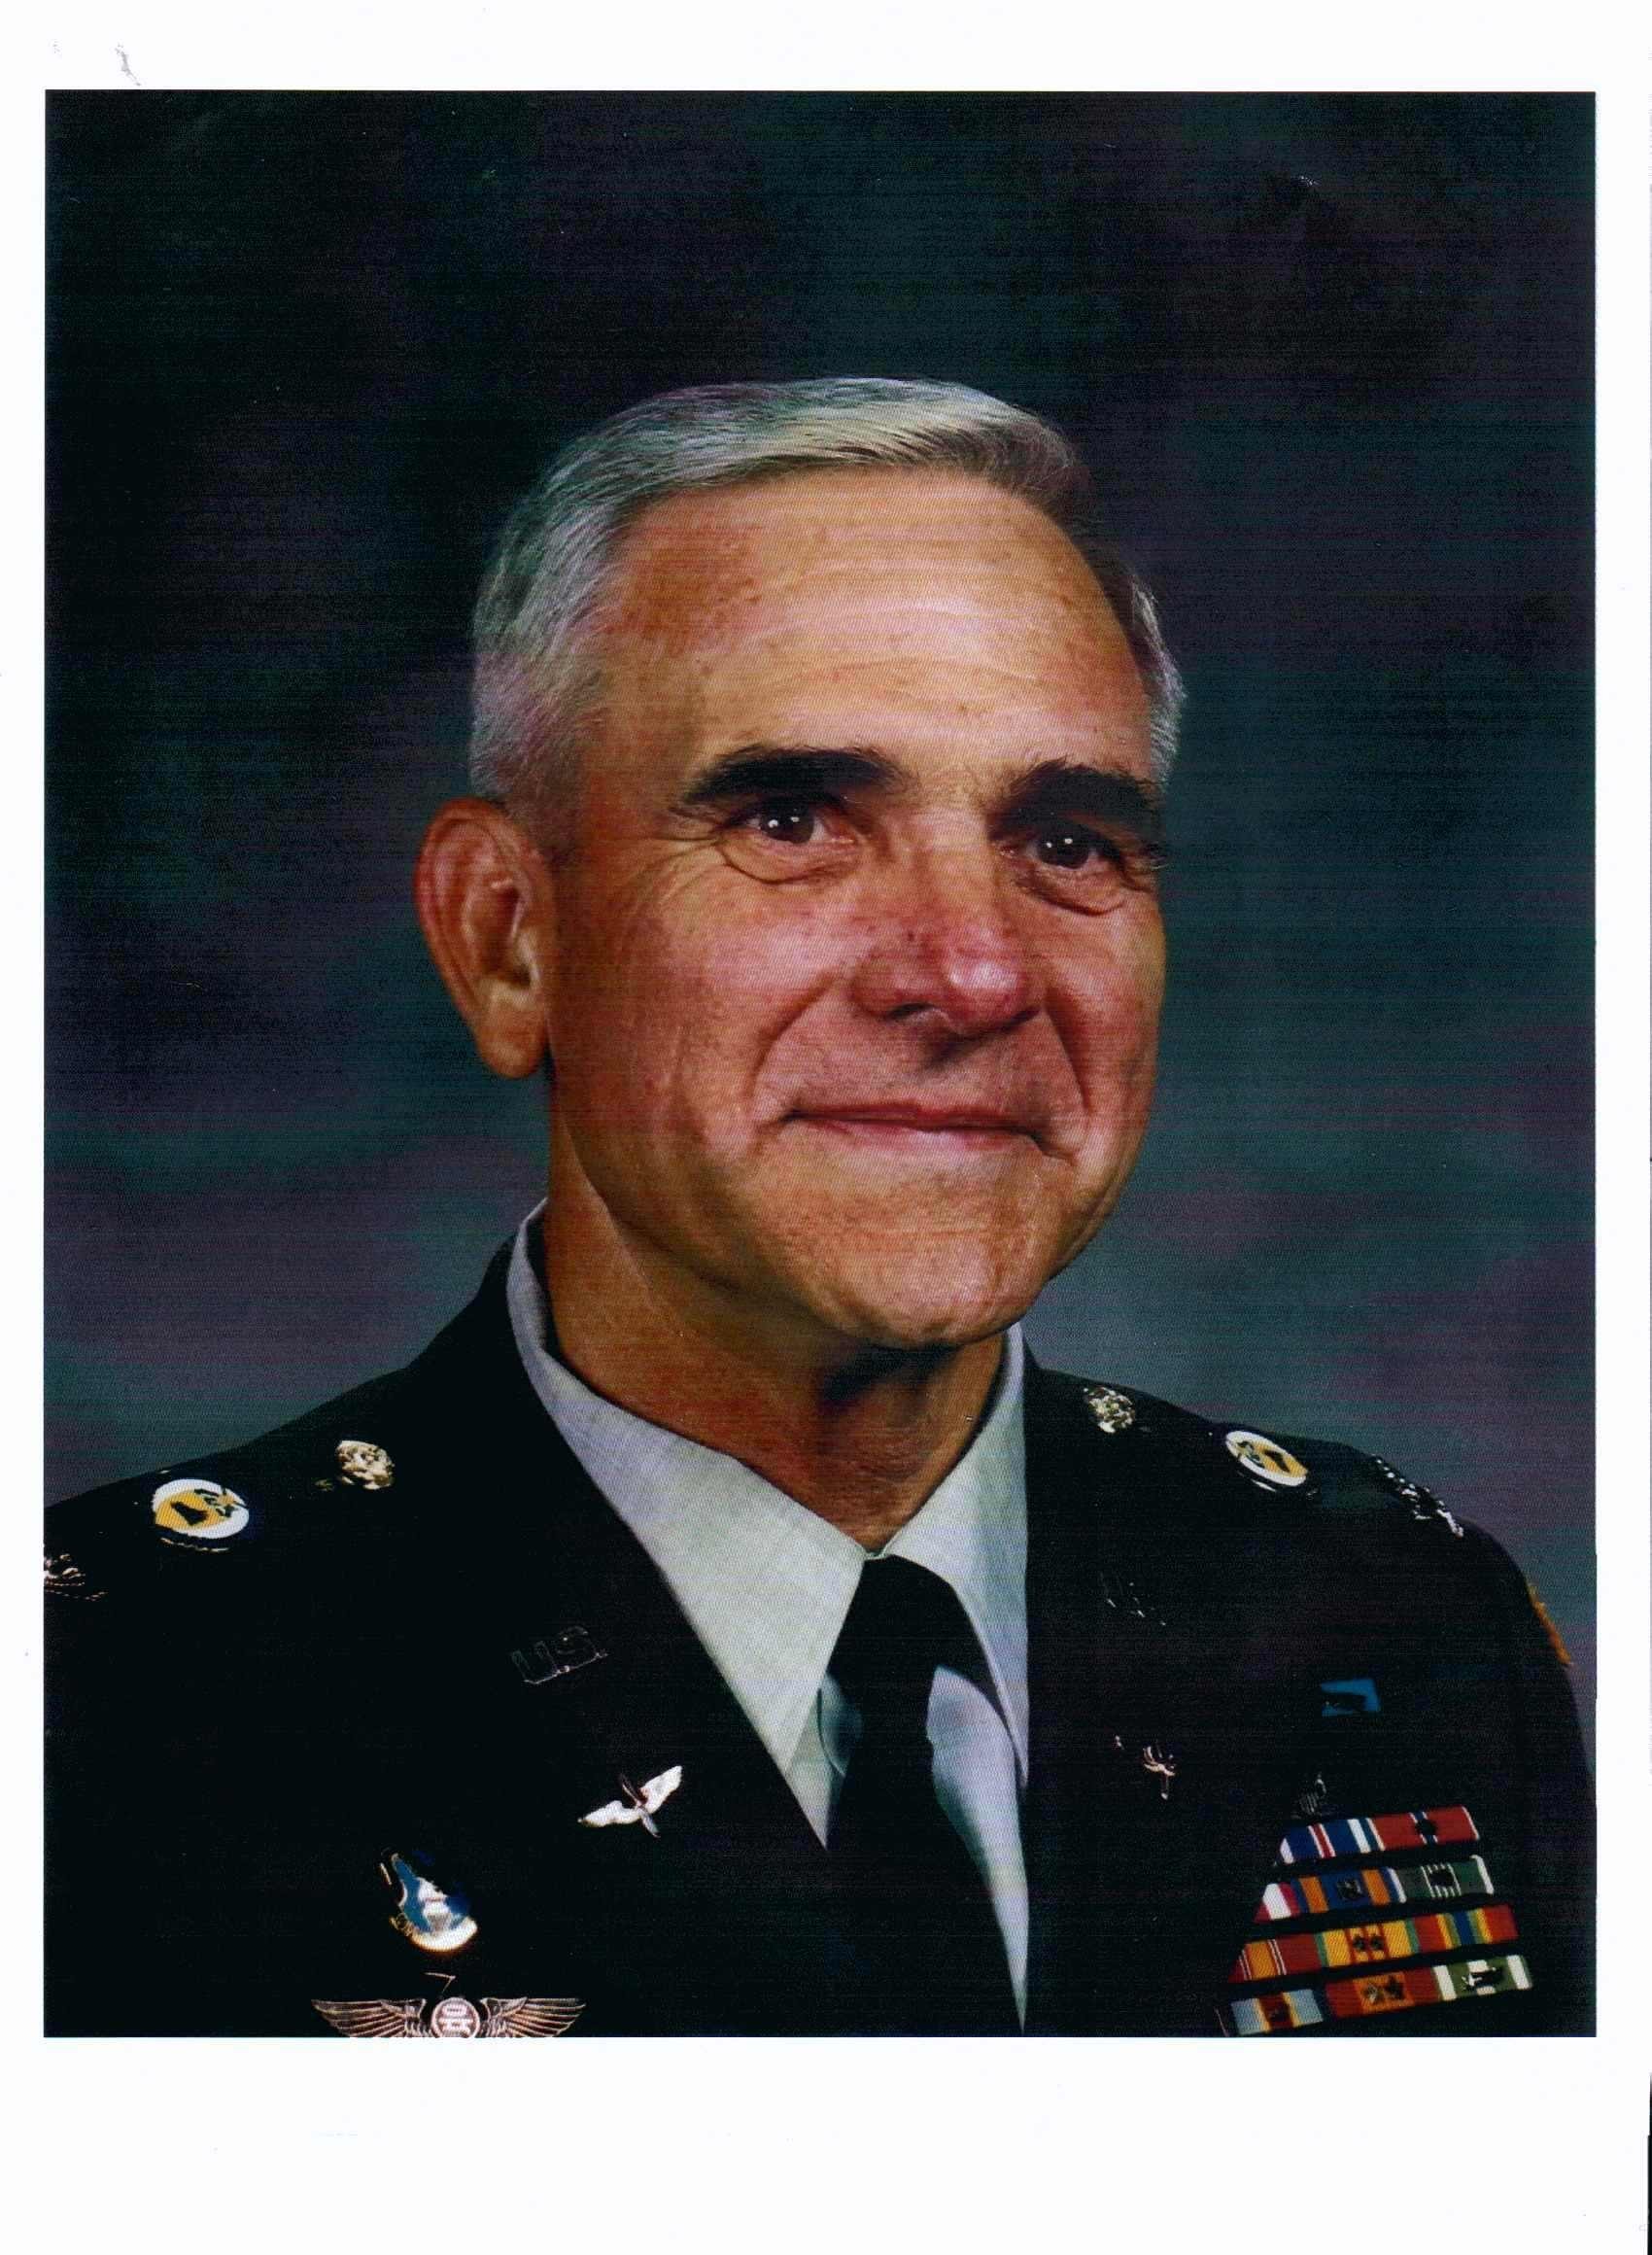 Col. (Ret.) Gerald Lord